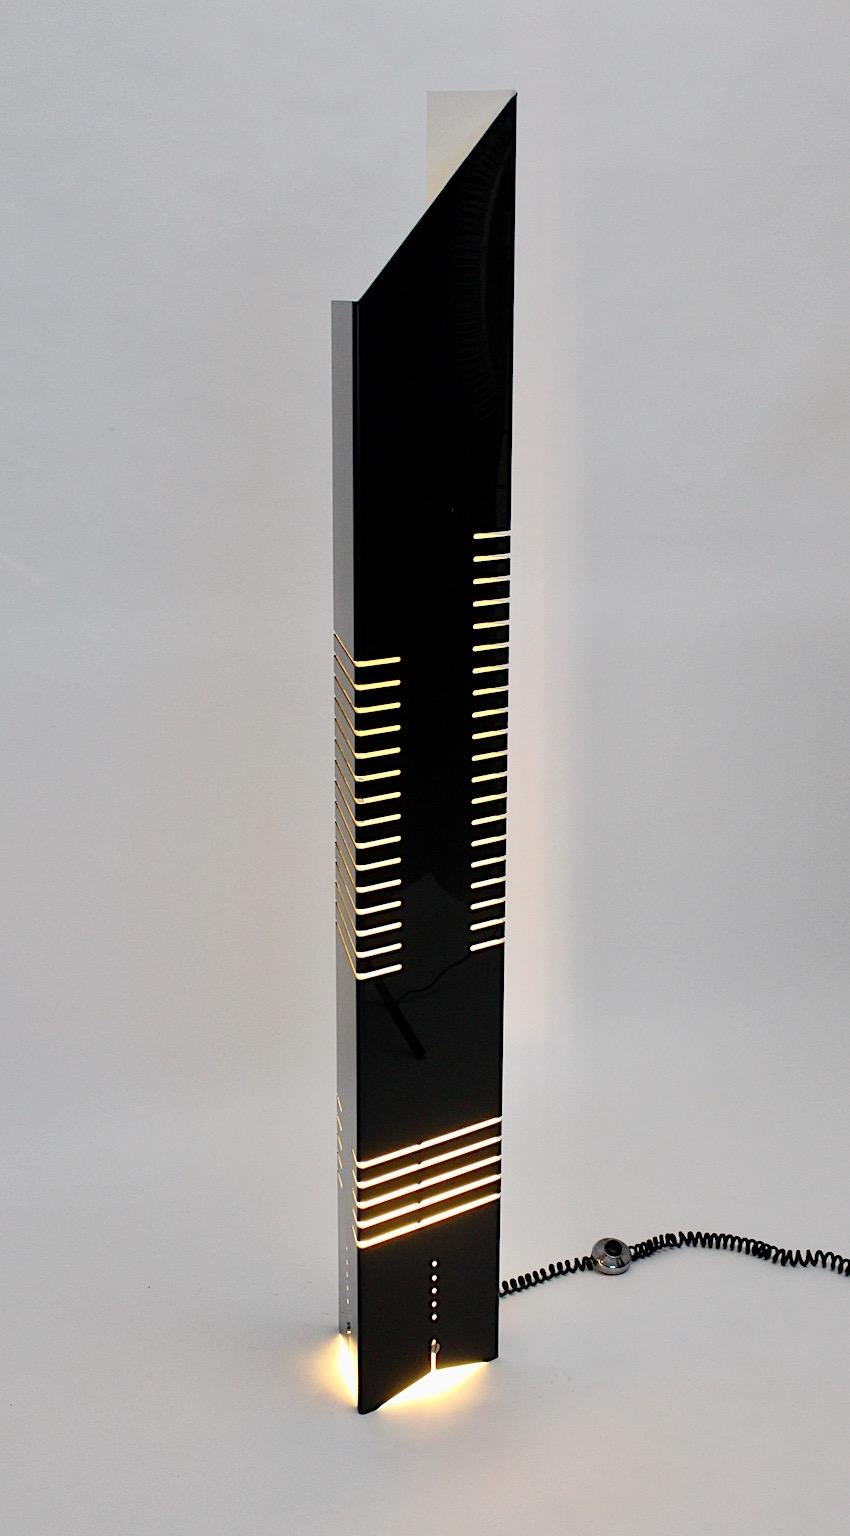 Black vintage metal floor lamp, which was designed by Lorenzo Carmellini and Frederico Rezzonico for Tronconi 1972 Italy.
The triangle shaped floor lamp is composed of black sheet metal body with cutouts and covered with acrylic. The folded acrylic